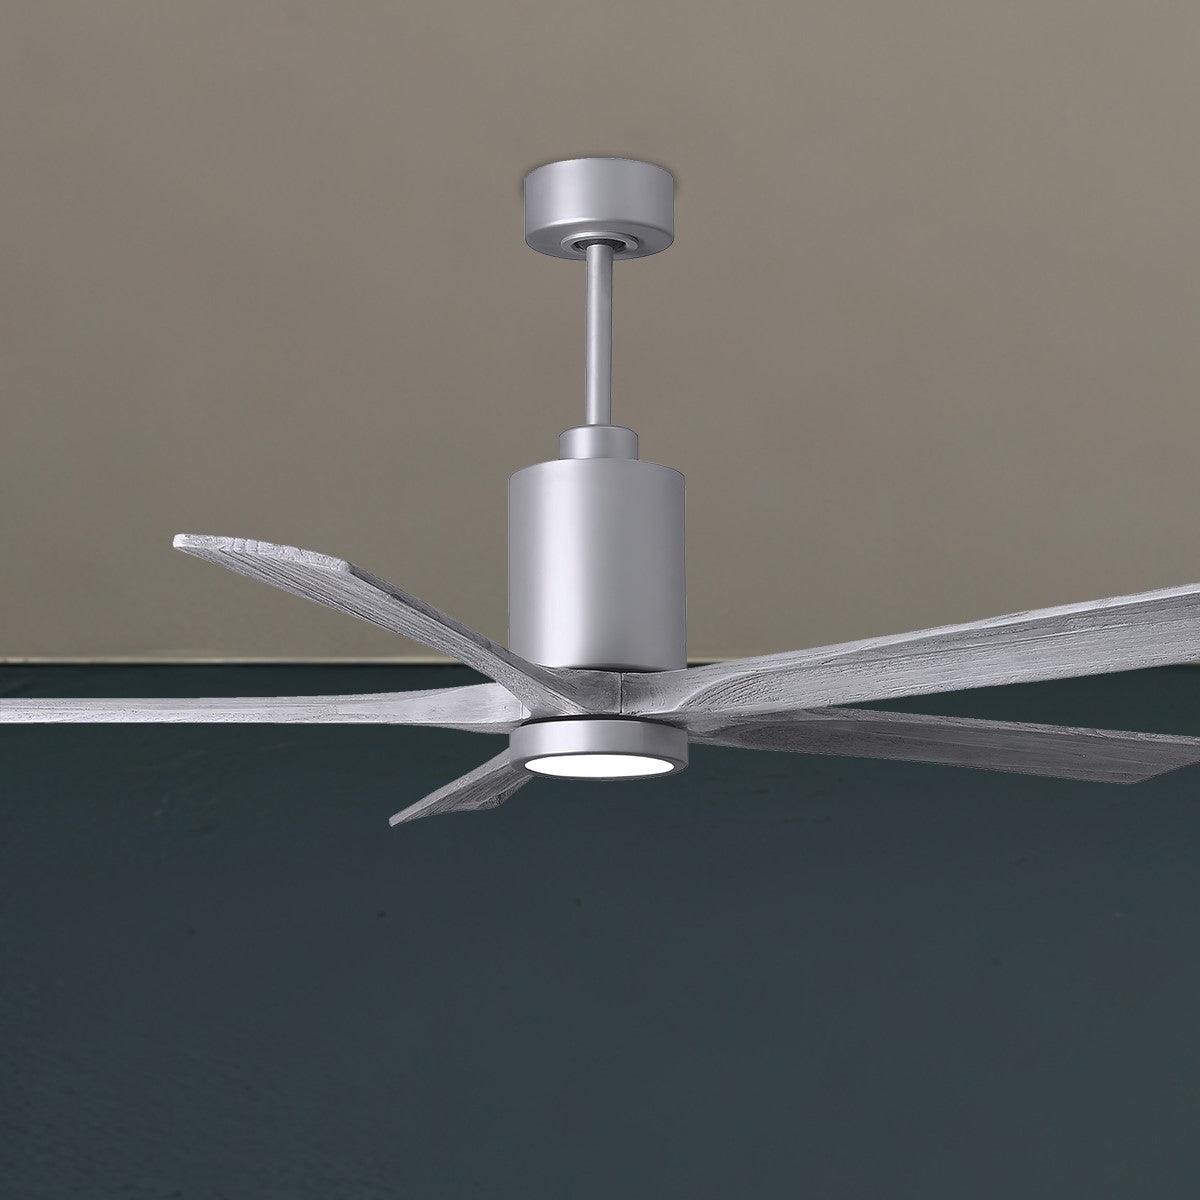 Patricia 60 Inch 5 Blades Modern Outdoor Ceiling Fan With Light, Wall And Remote Control Included